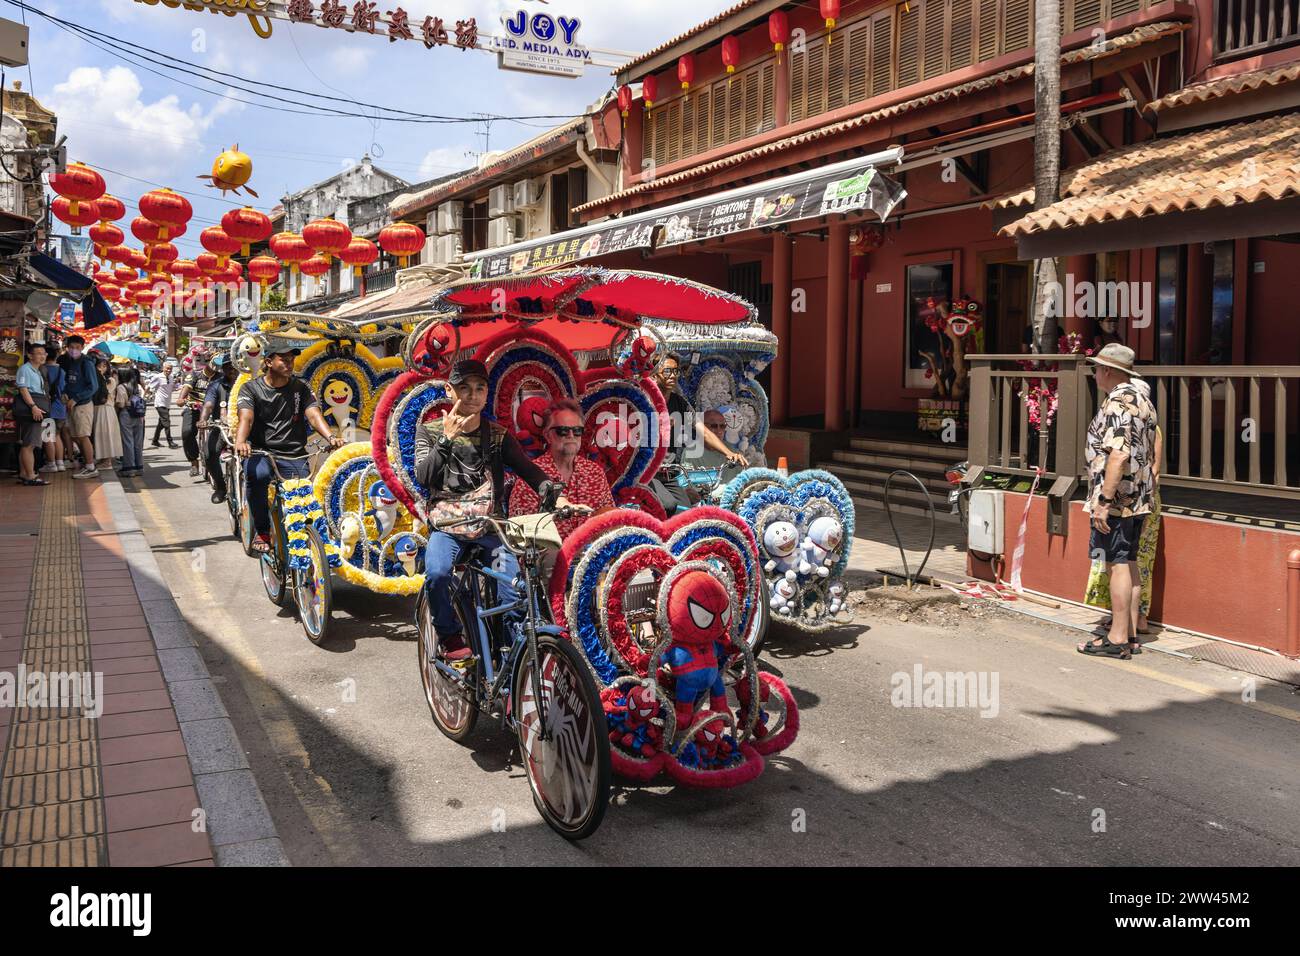 Decorated Trishaws, or cycle rikshaws, transporting tourists in the streets of Malacca, Malaysia Stock Photo